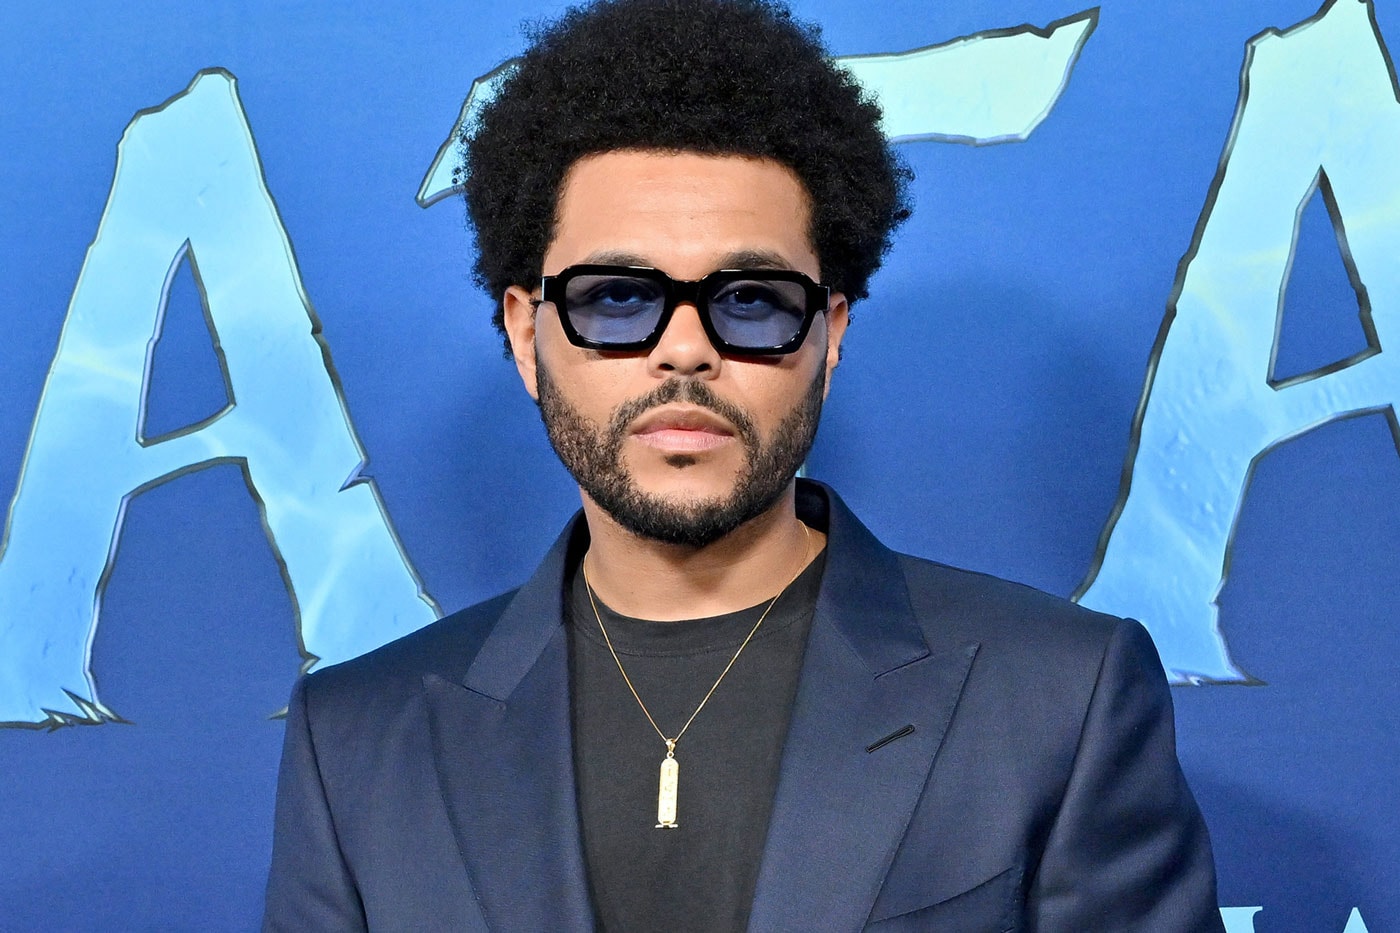 Did The Weeknd Plagiarize "The Hills"?